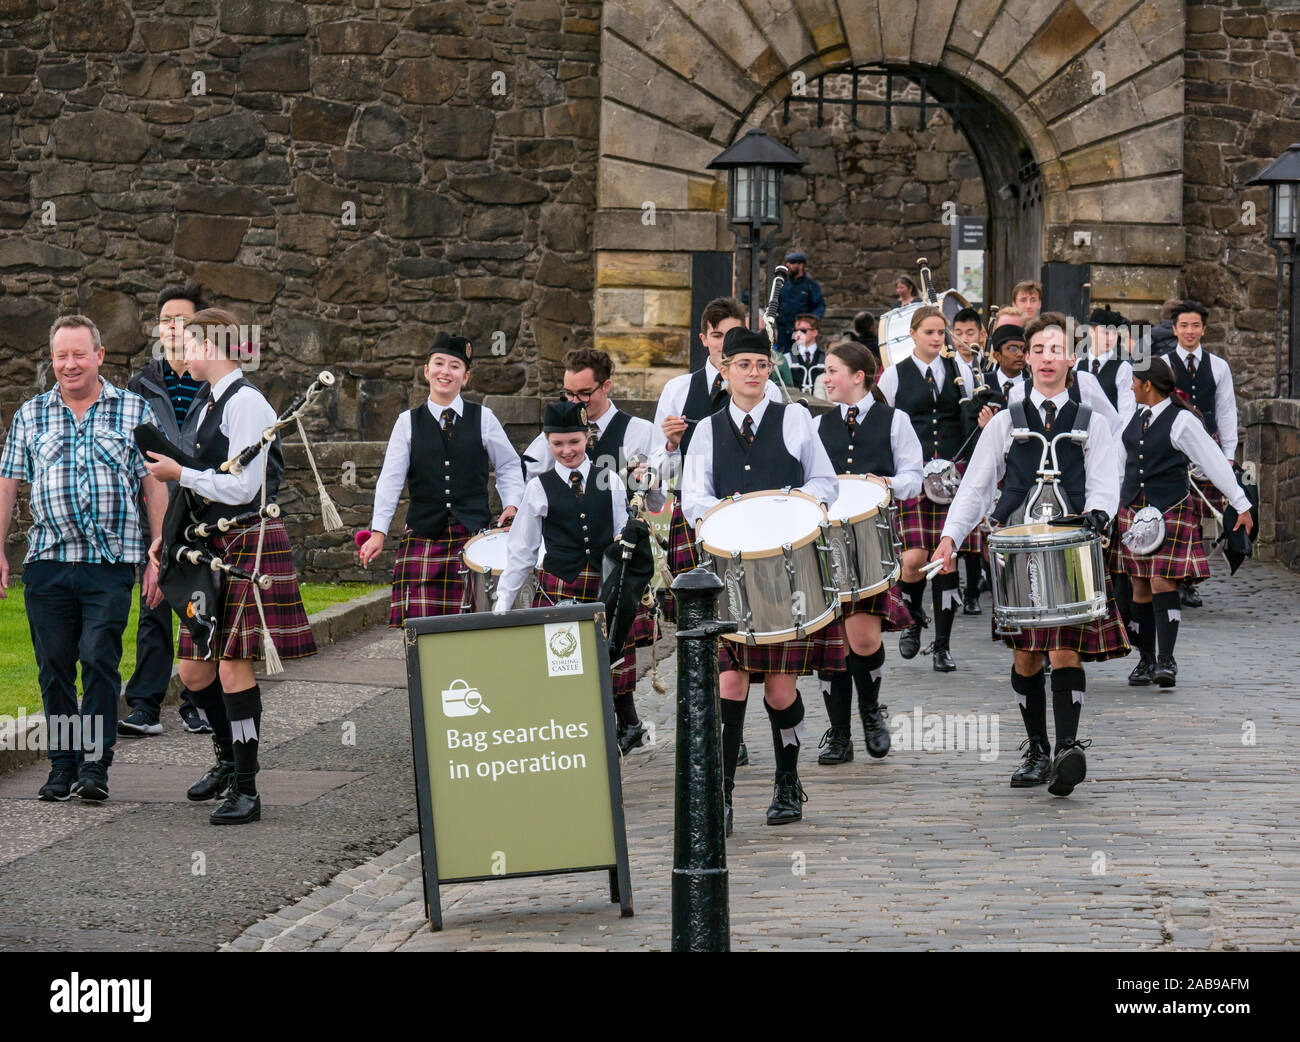 Youths or teenagers from school pipe band with drums and bagpipes wearing matching kilts, entrance gate of Stirling Castle, Scotland, UK Stock Photo